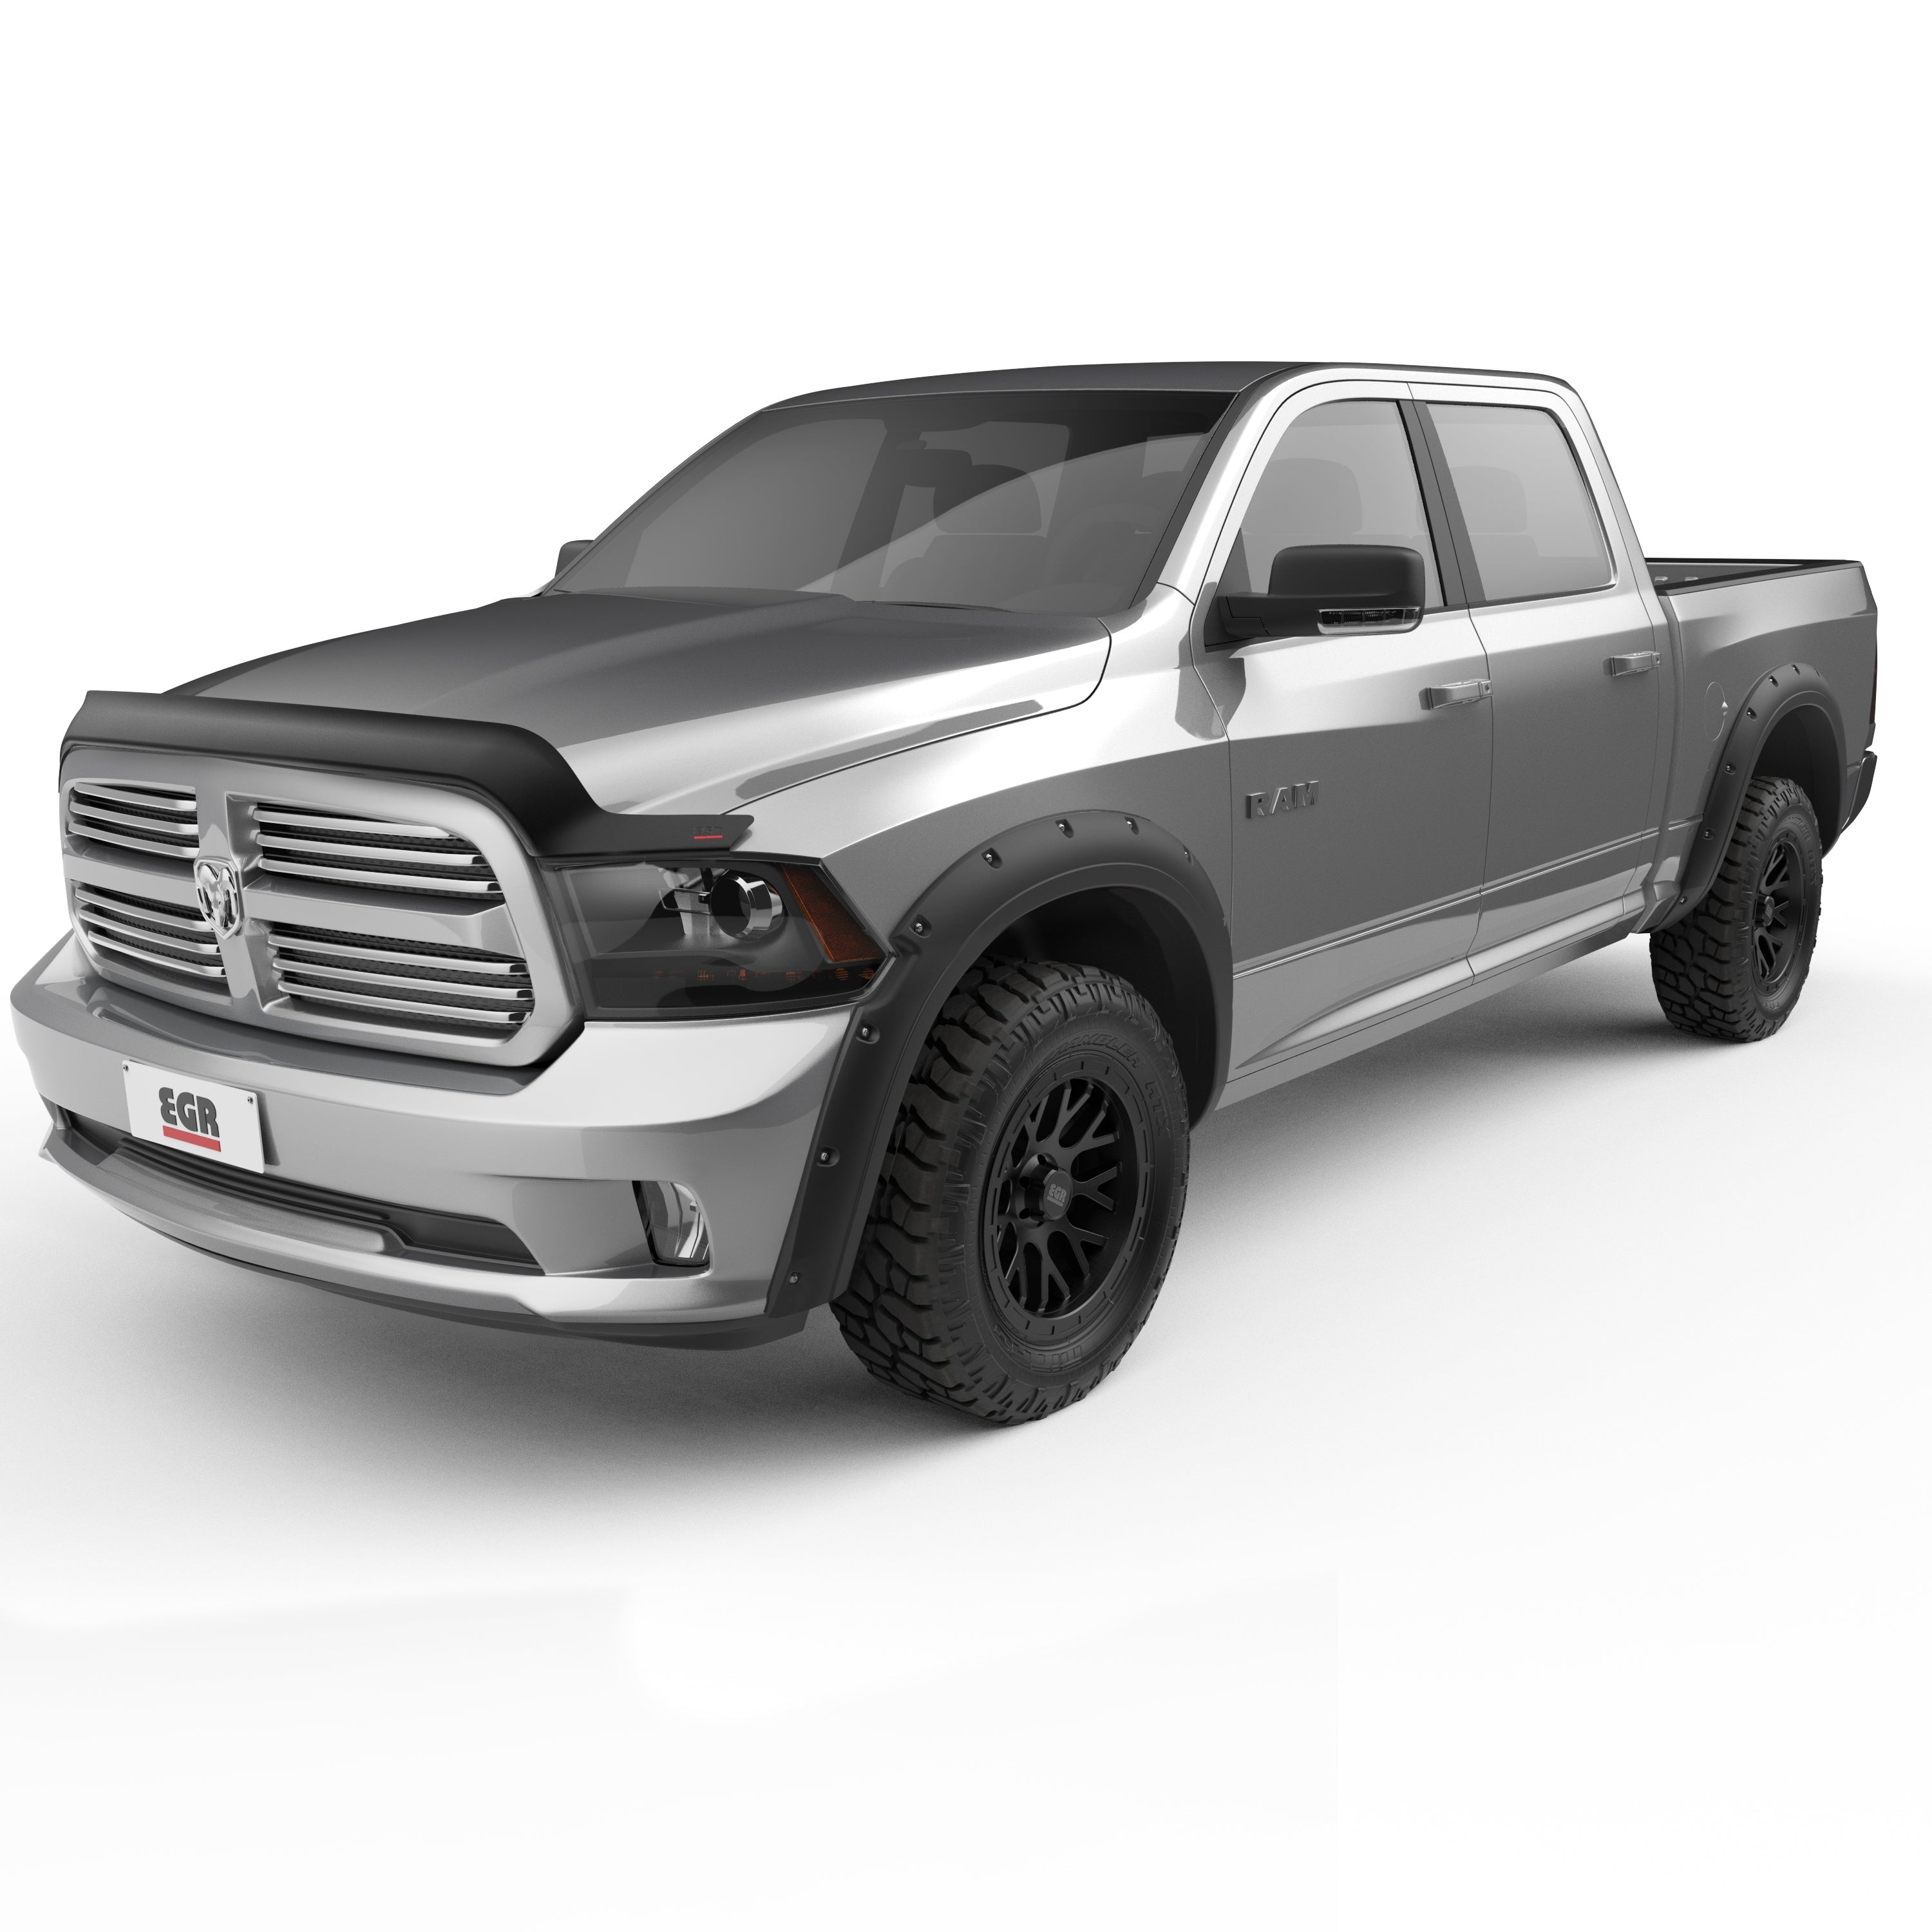 EGR 2011-2018 Dodge Ram 1500 2011-2023 Ram 1500 Classic Crew Cab Extended Cab Pickup 4 Door Set Of 4 Traditional Bolt-On Look Fender Flares 792754